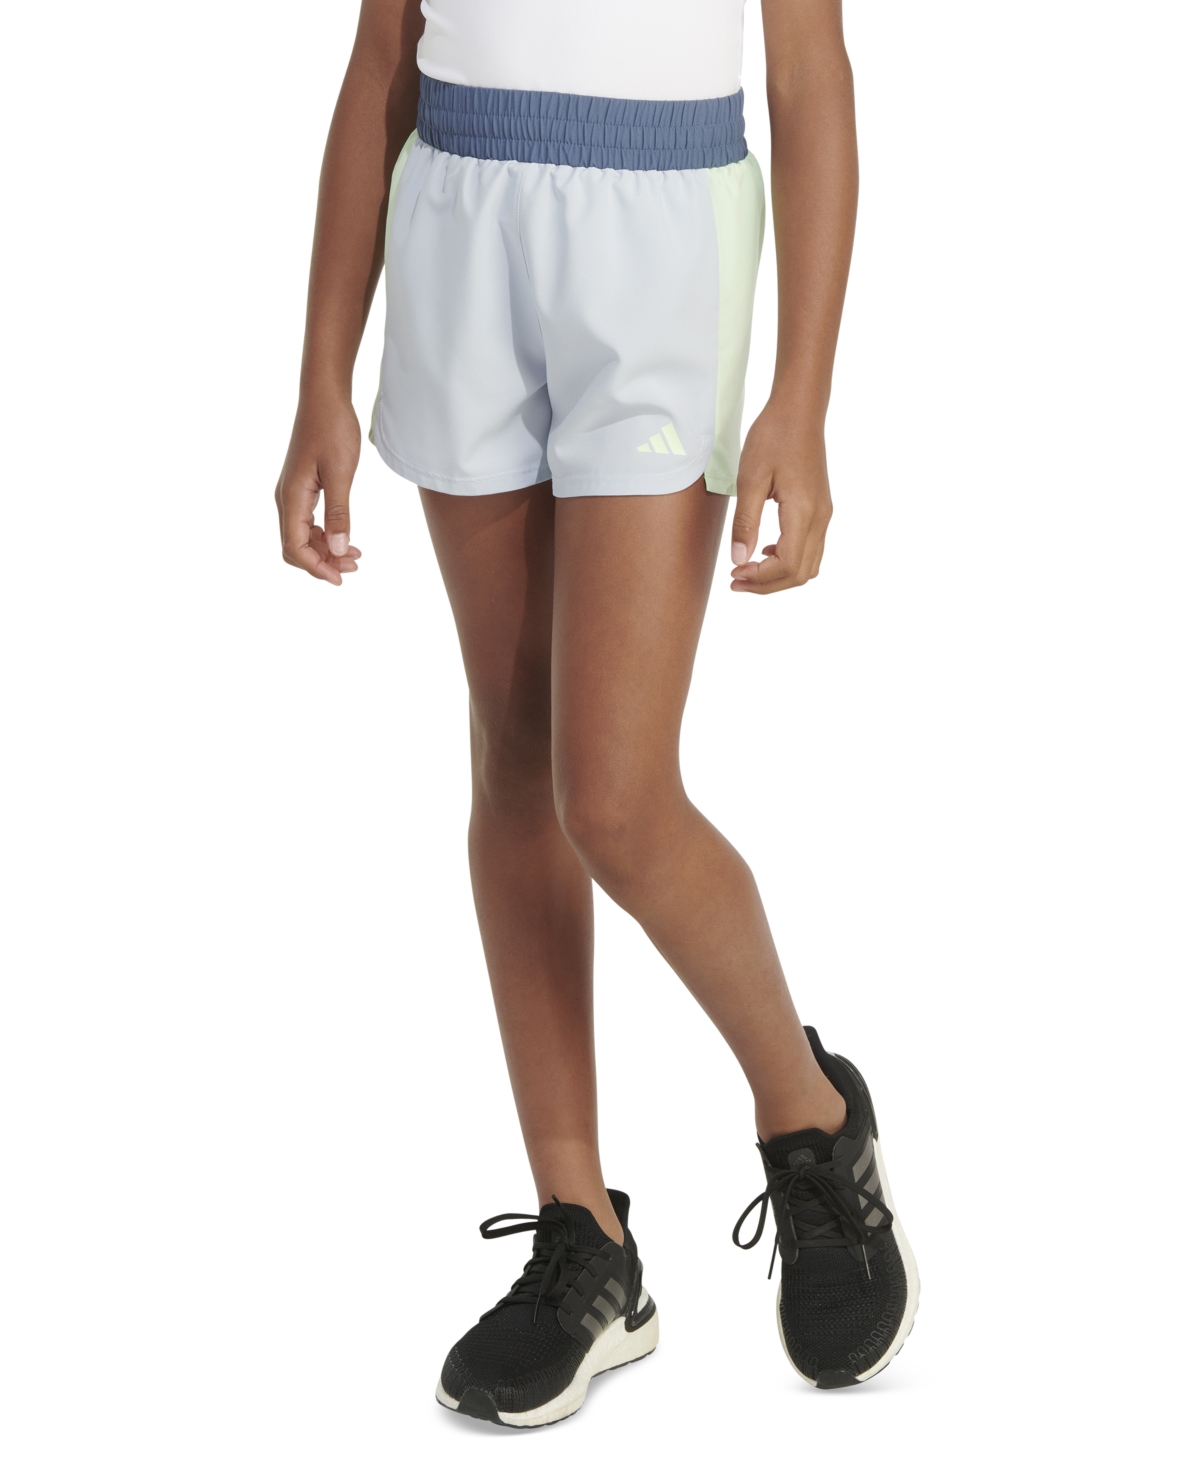 Adidas Originals Kids' Big Girls Aeroready Colorblocked Woven Pacer Shorts In Halo Blue